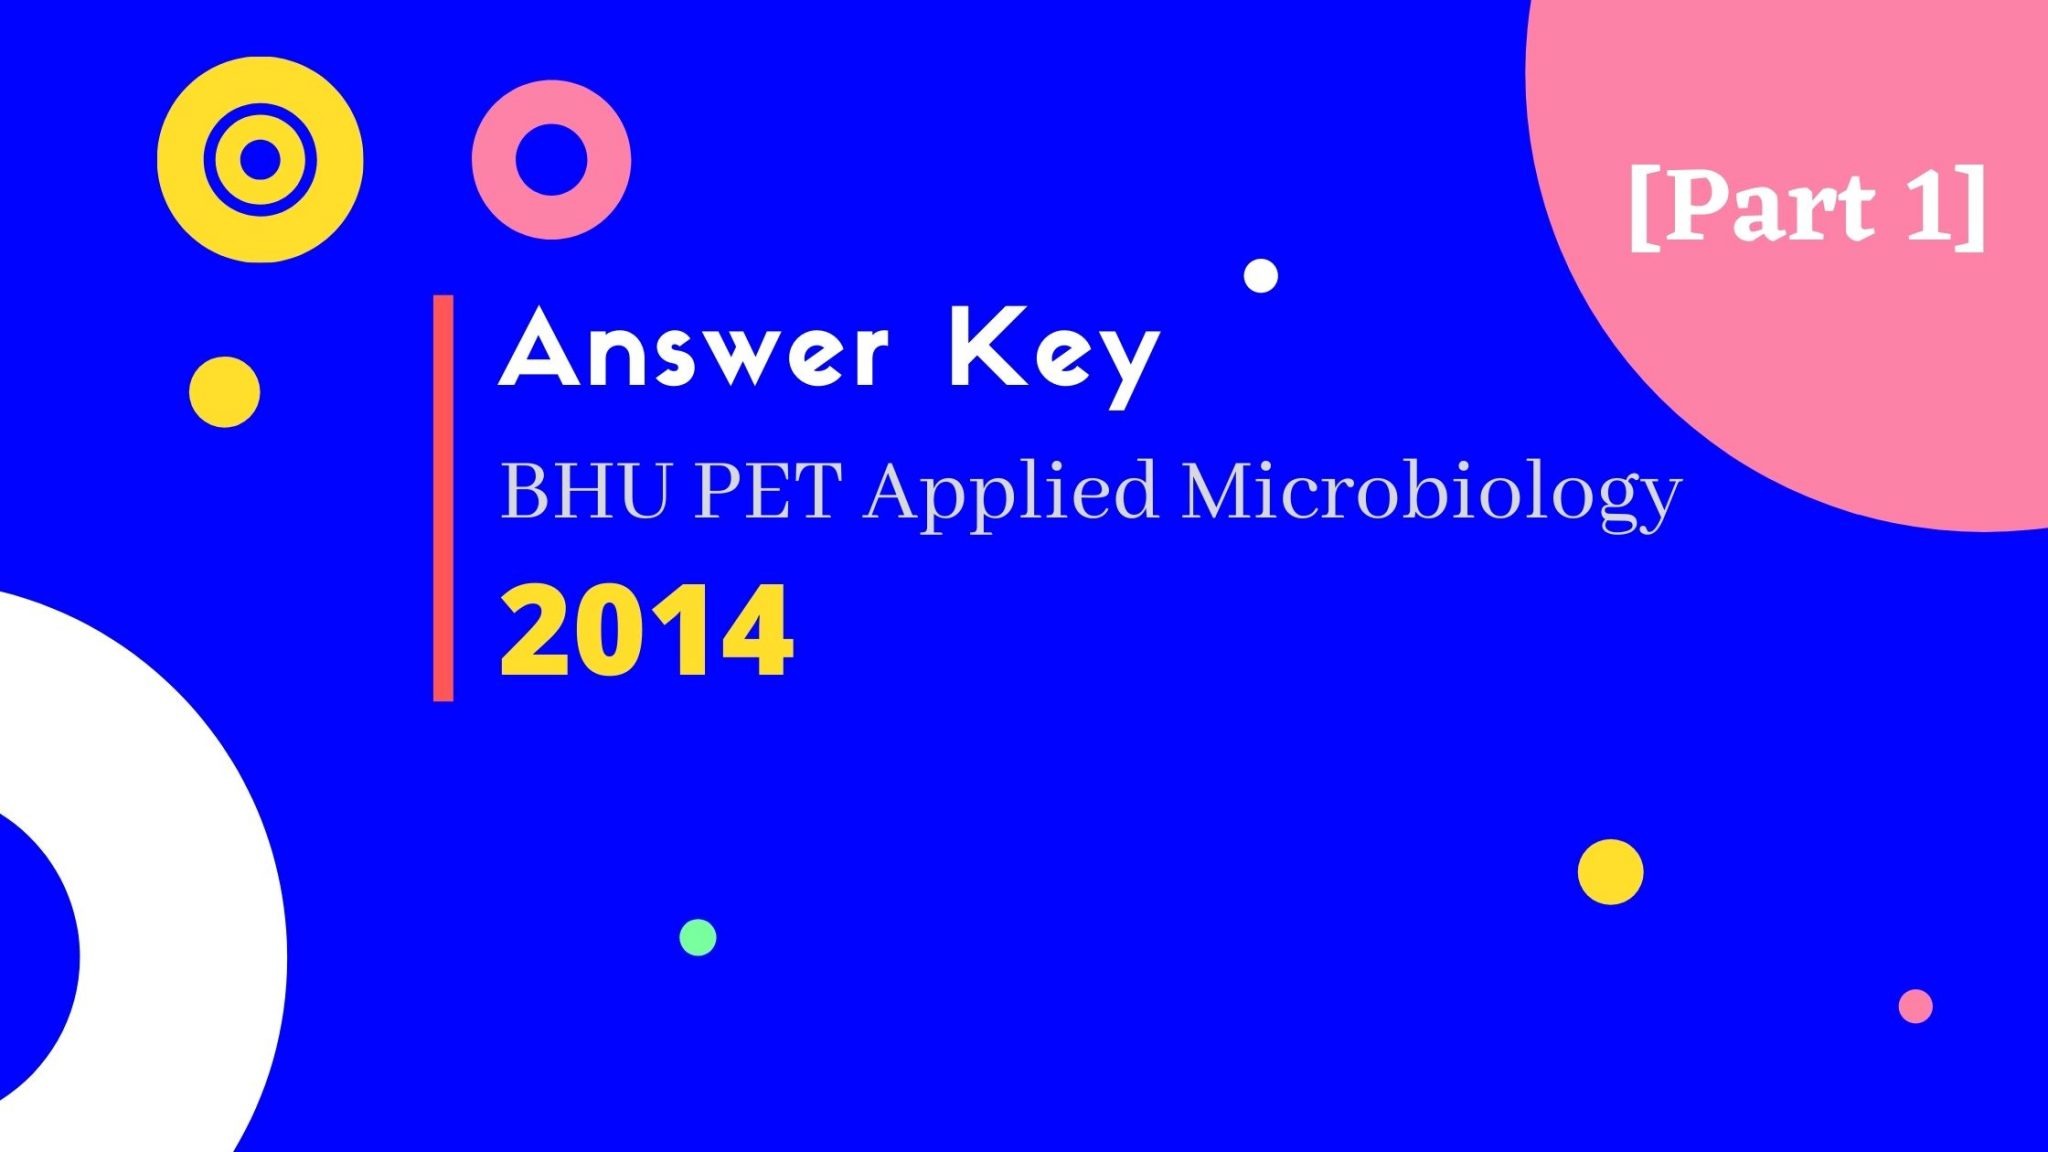 answer-key-of-bhu-pet-applied-microbiology-2014-part-1